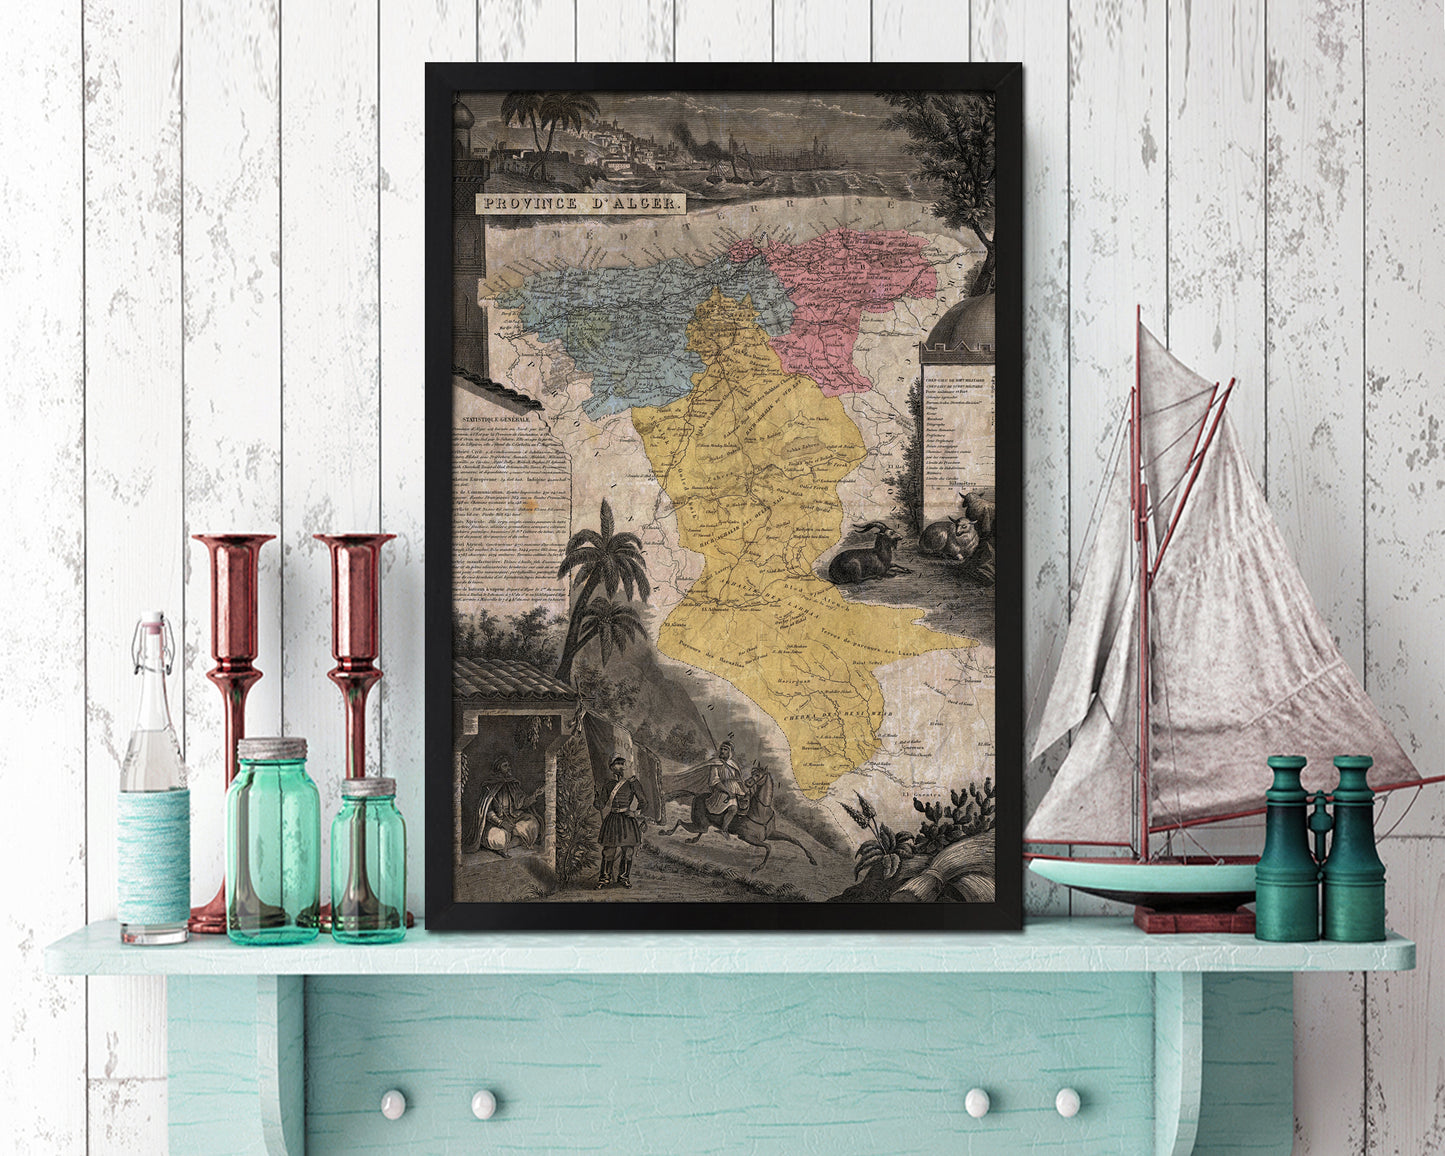 Province D'alcer Historical Map Wood Framed Print Art Wall Decor Gifts